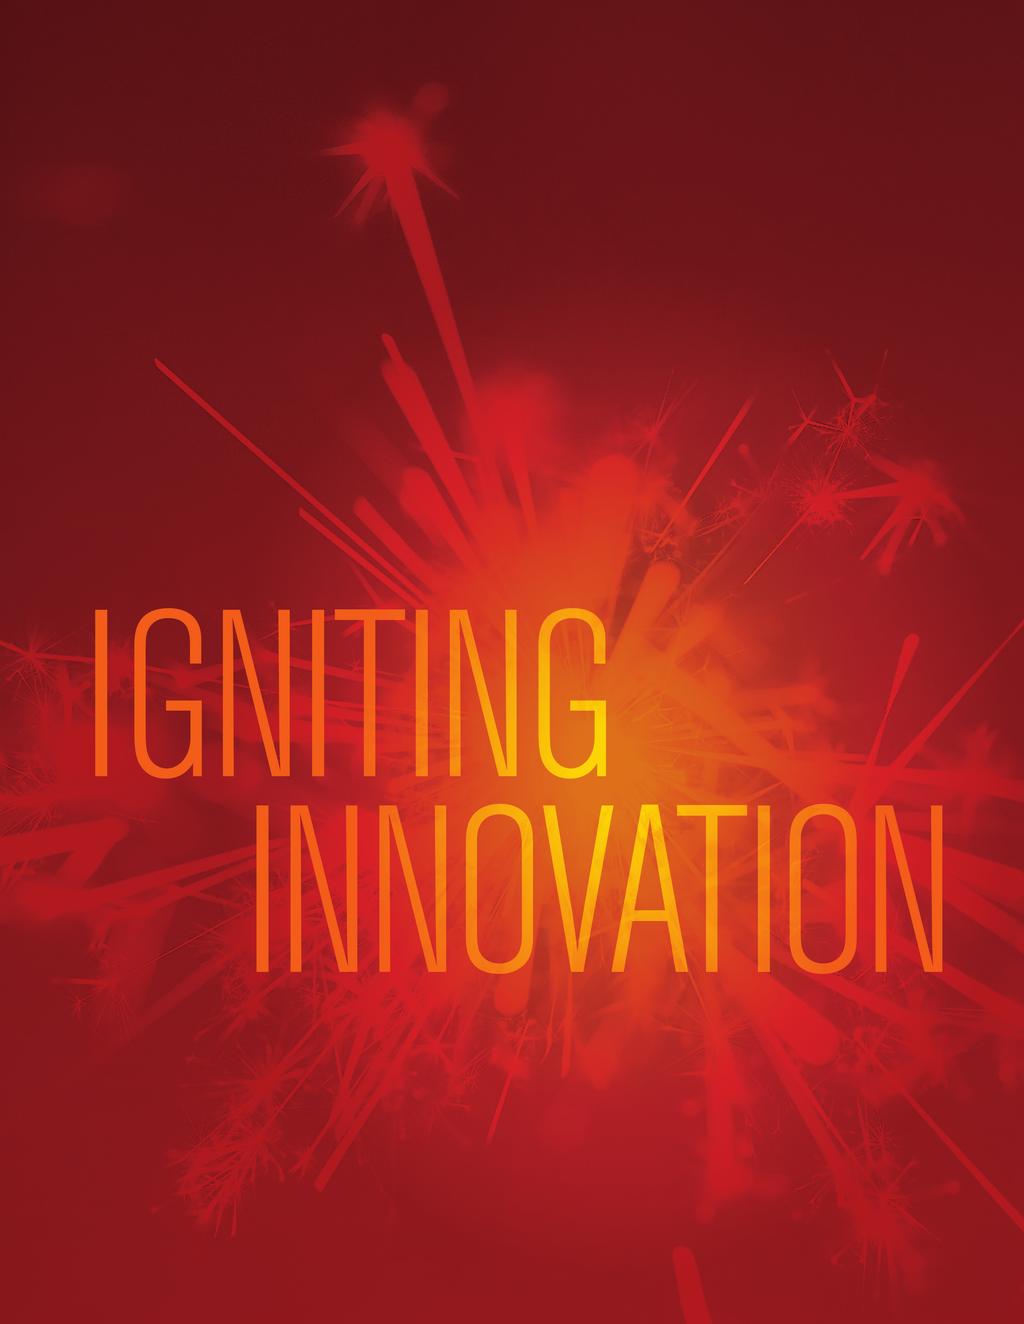 IGNITING INNOVATION 2017 ACGME ANNUAL EDUCATIONAL